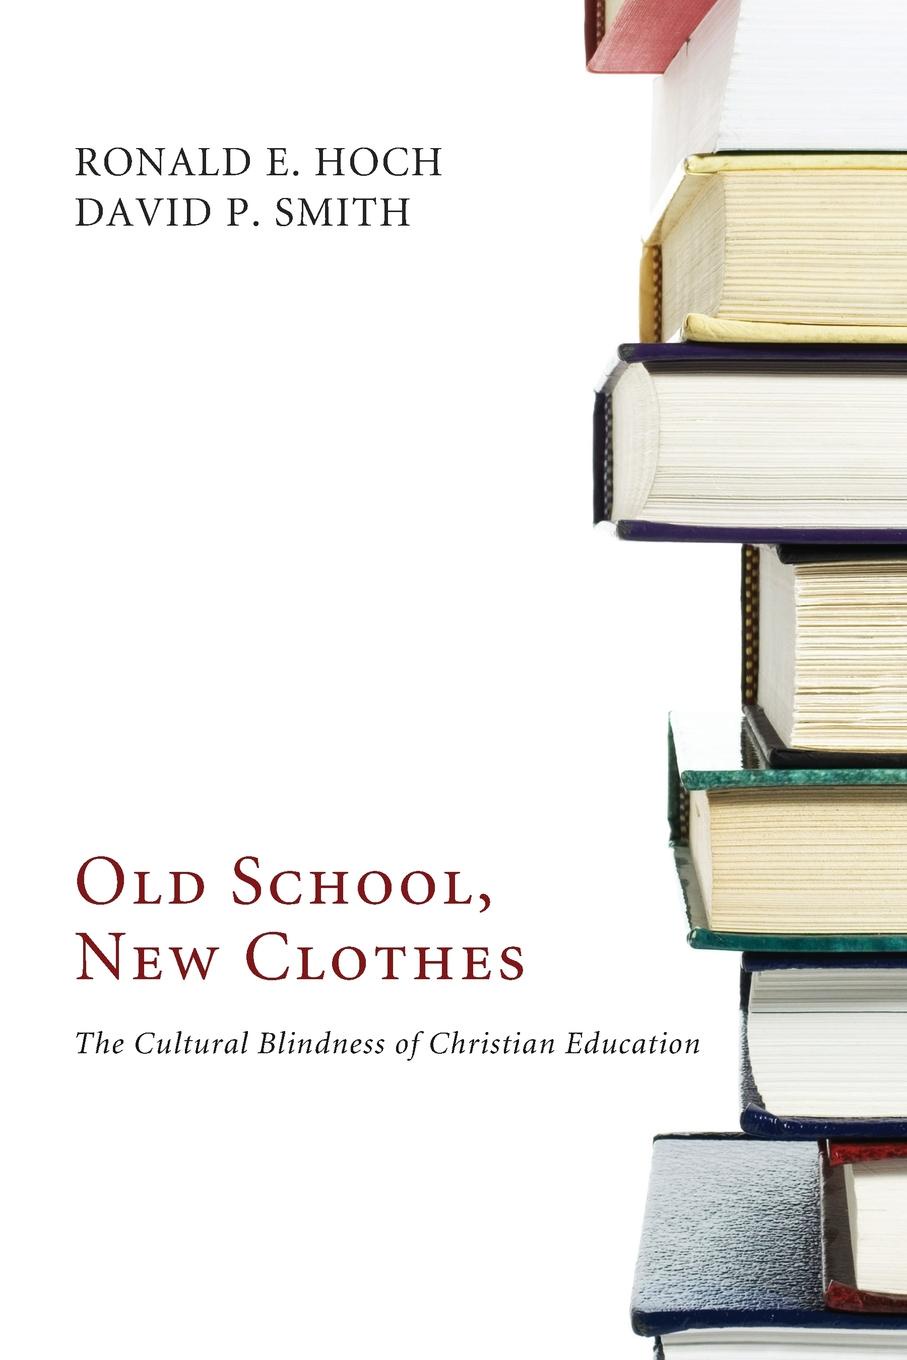 Old School, New Clothes. The Cultural Blindness of Christian Education